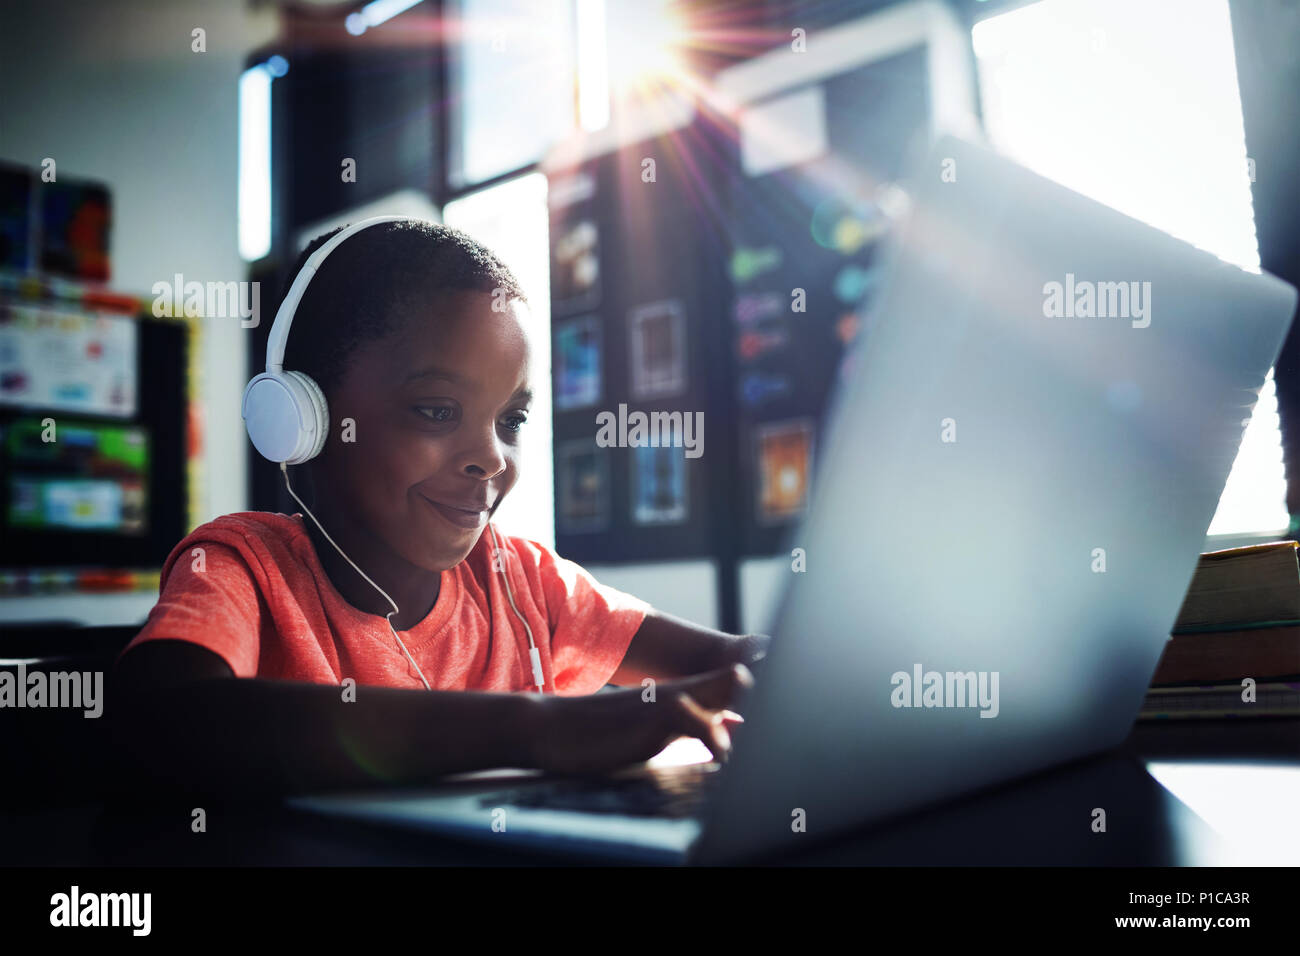 Boy listening music while using laptop Banque D'Images